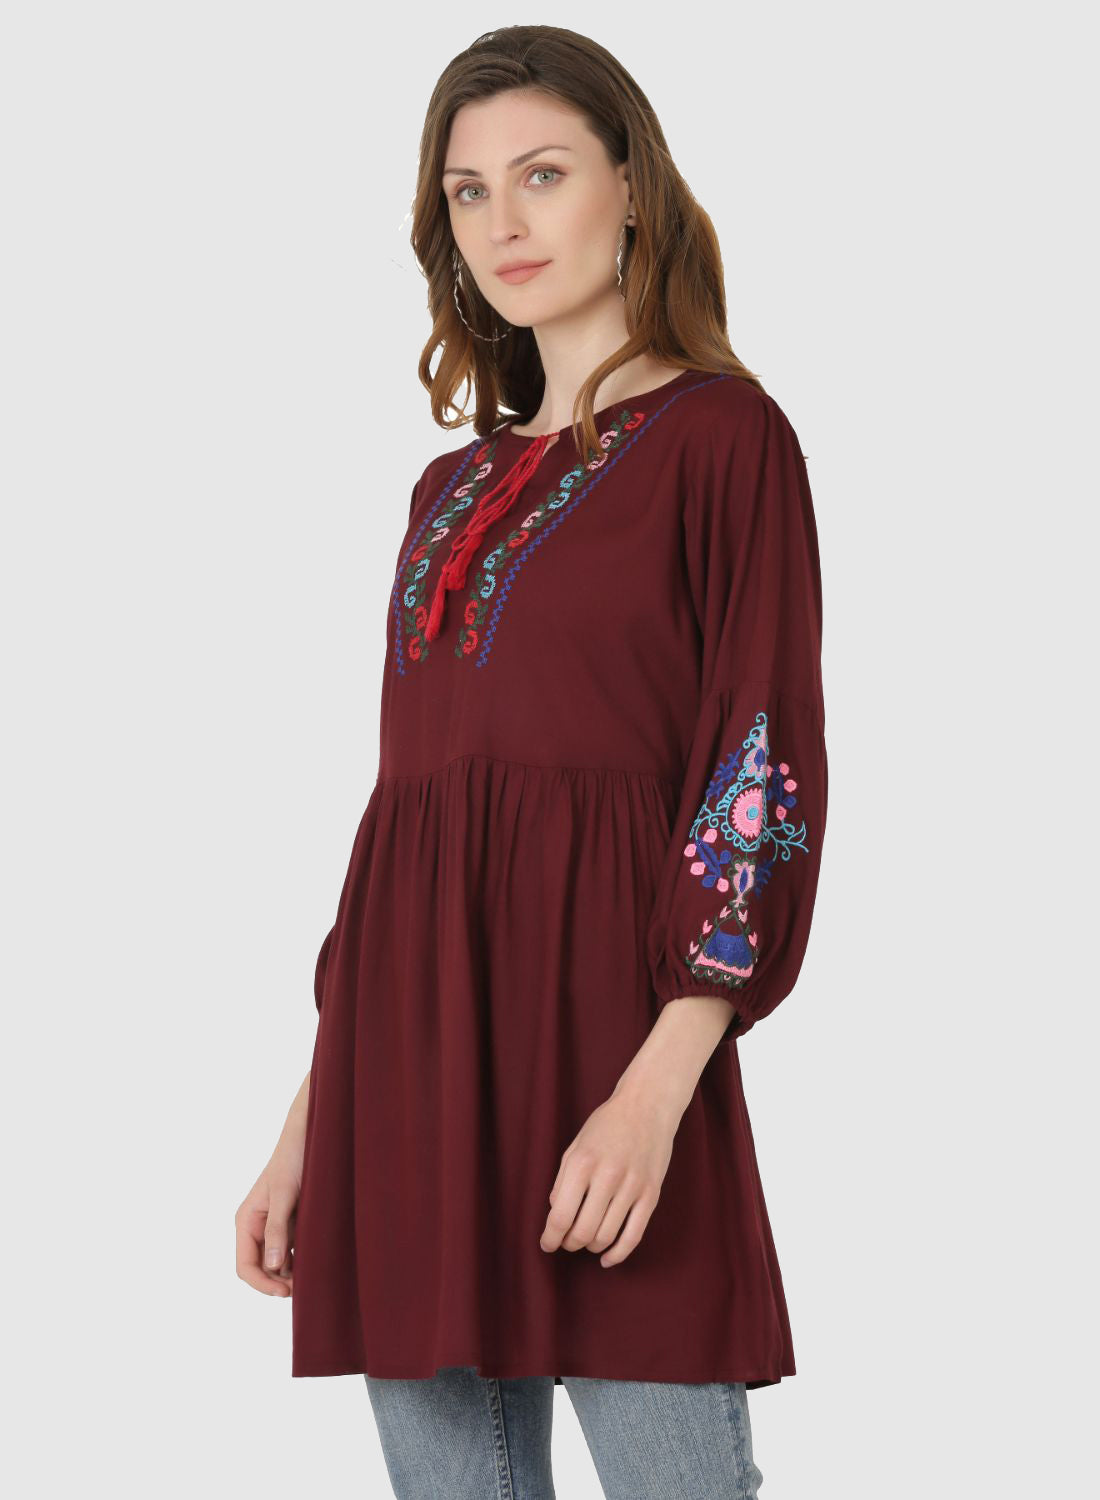 Women Top Brown Regular Fit and Flare Puff Sleeve Embroidery Work